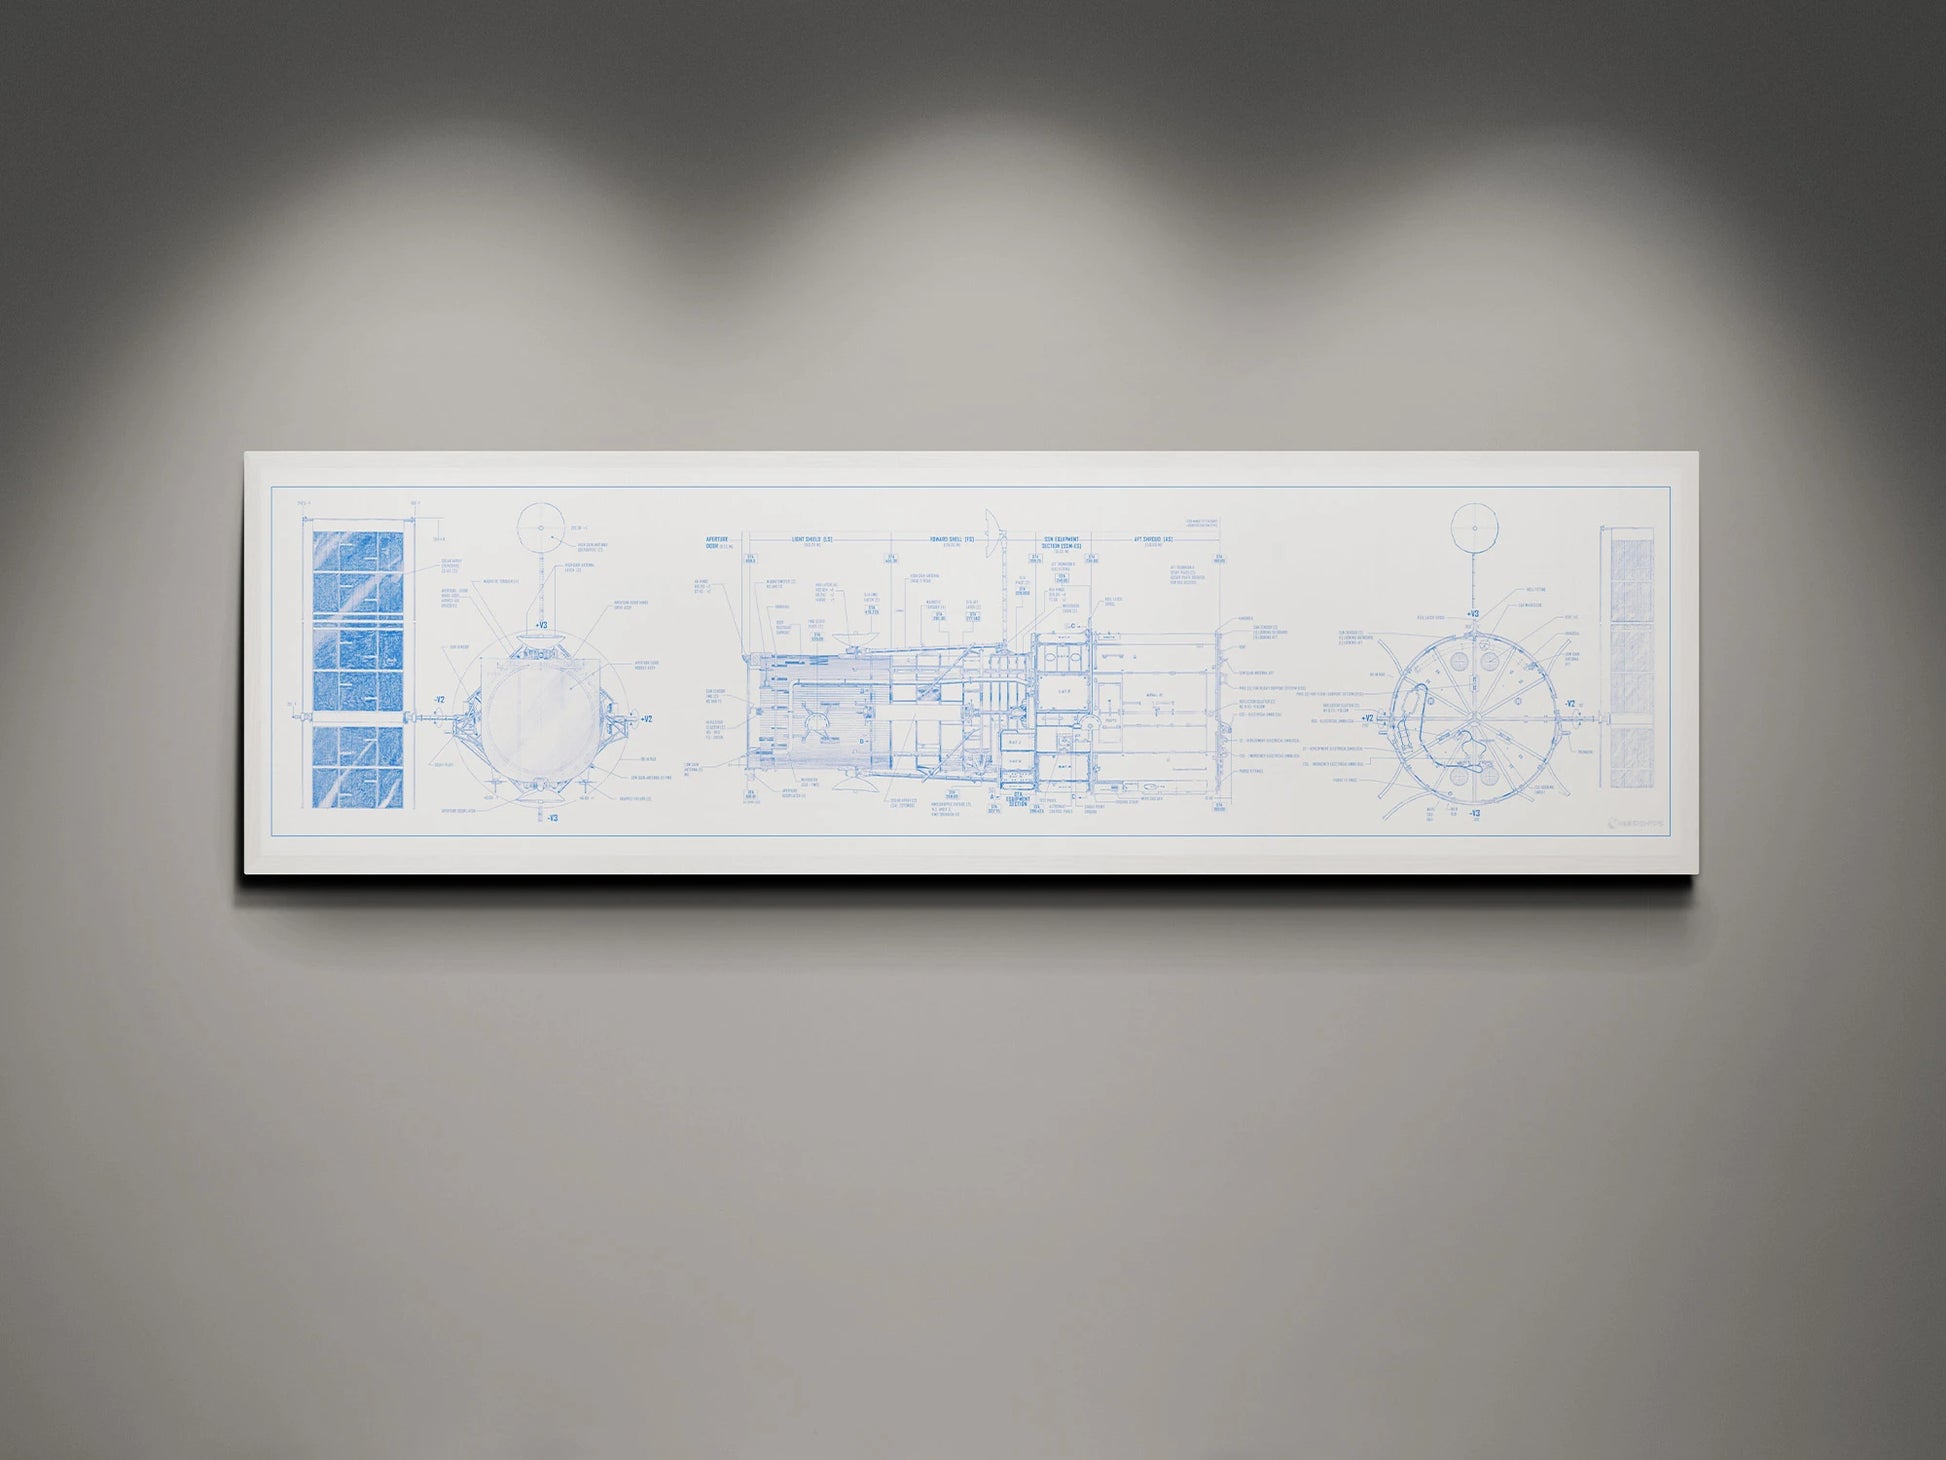 Hubble Space Telescope Blueprint | Rocket Blueprint Posters | A framed blueprint of the NASA Hubble Space Telescope, showcasing intricate technical drawings in blue on a white background. The blueprint is mounted on a gray wall and highlighted by soft overhead lights.